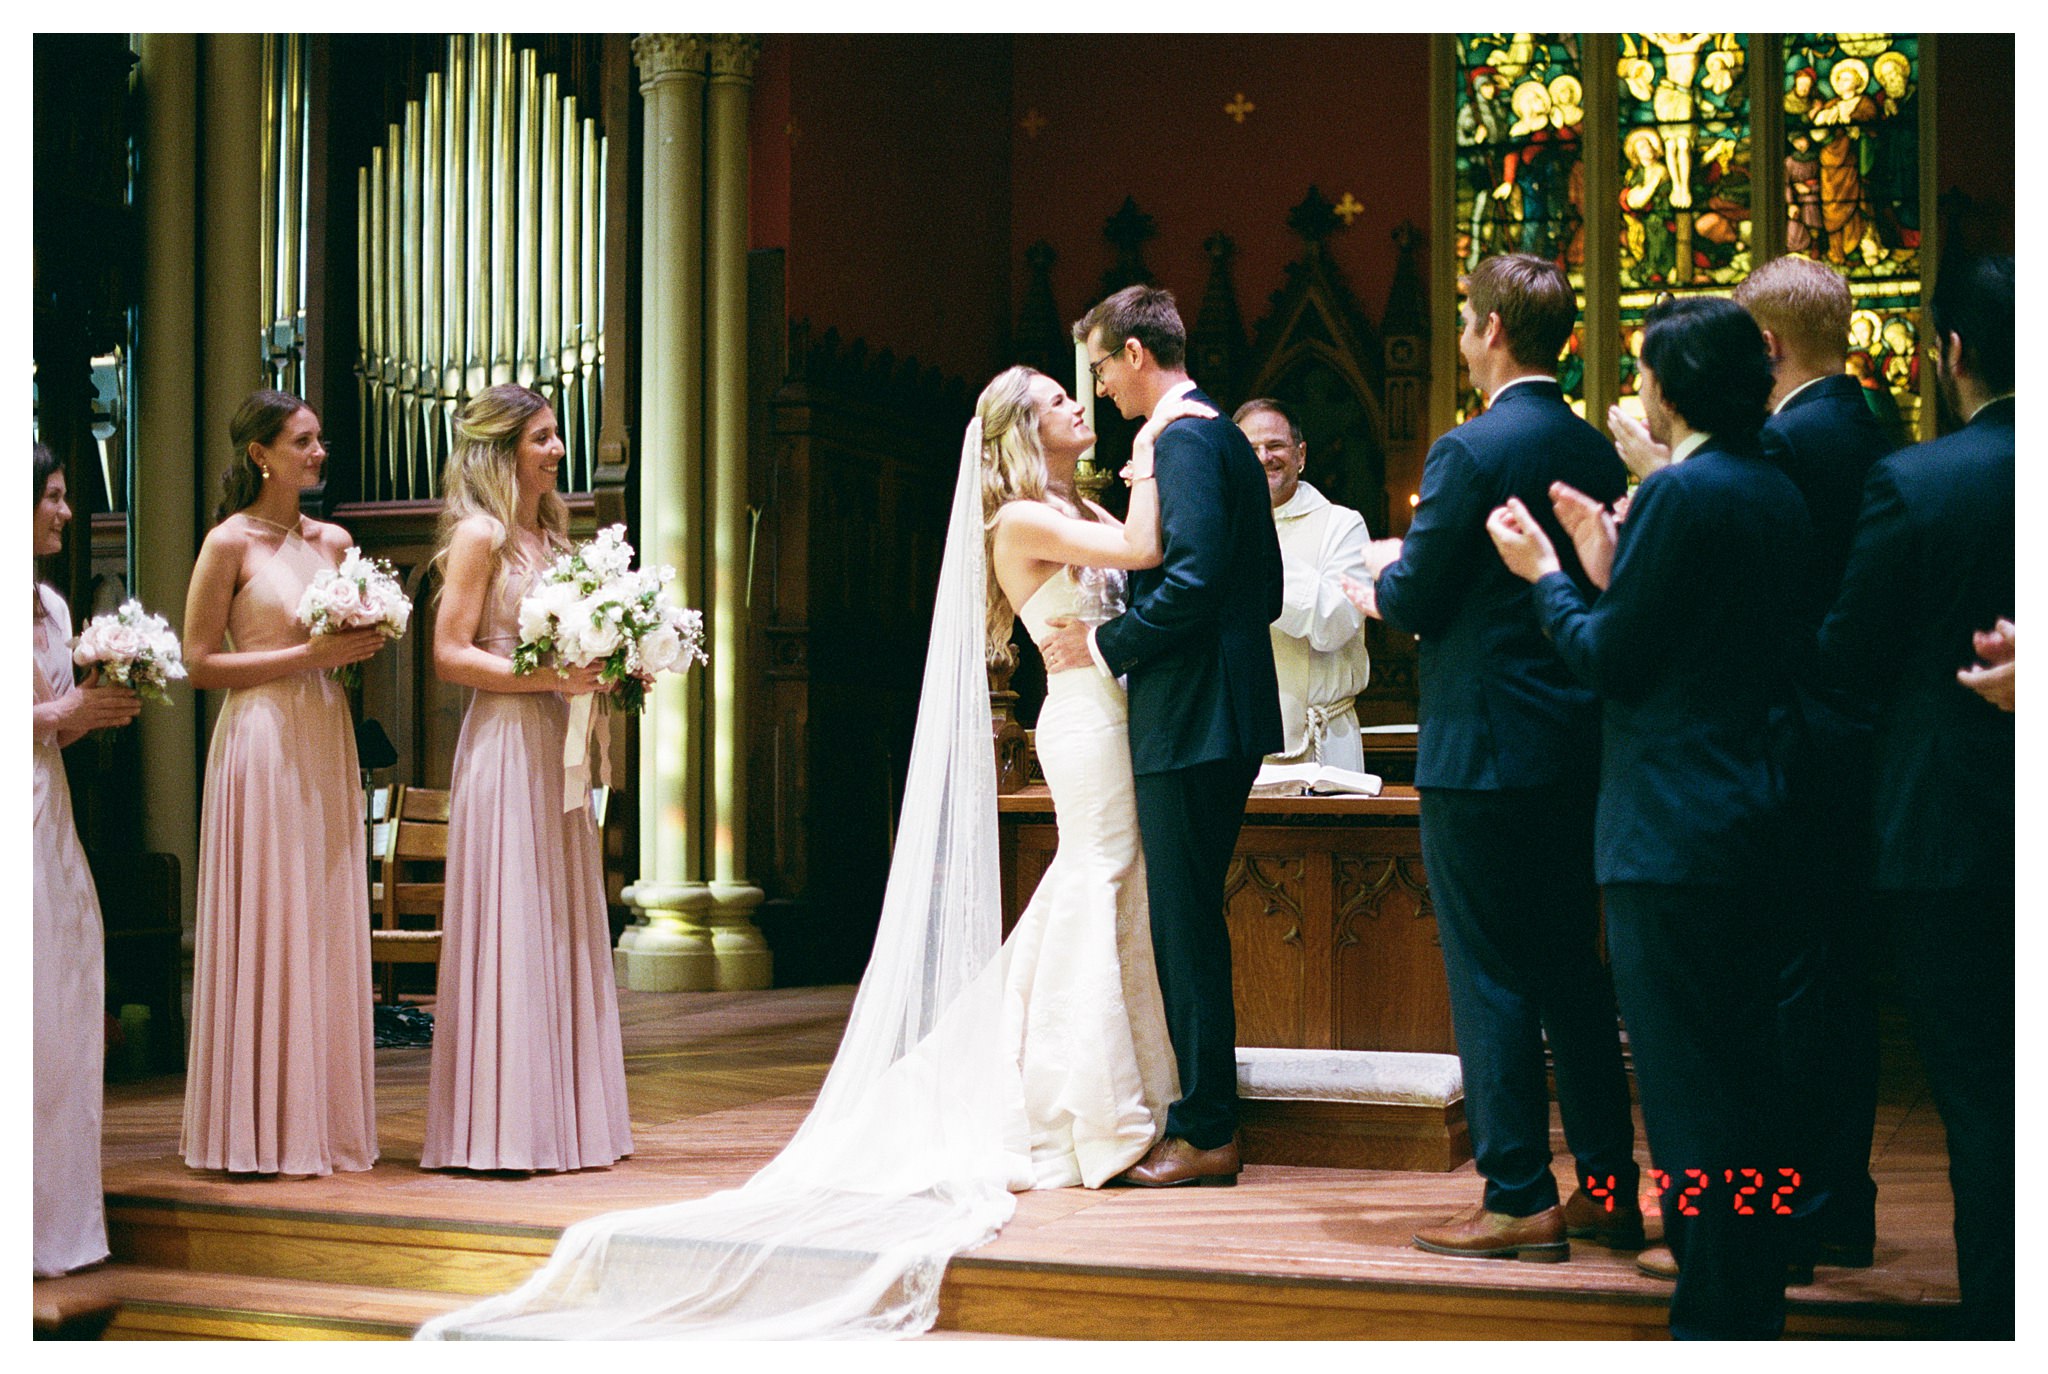 A New Orleans Garden District wedding ends with a kiss.